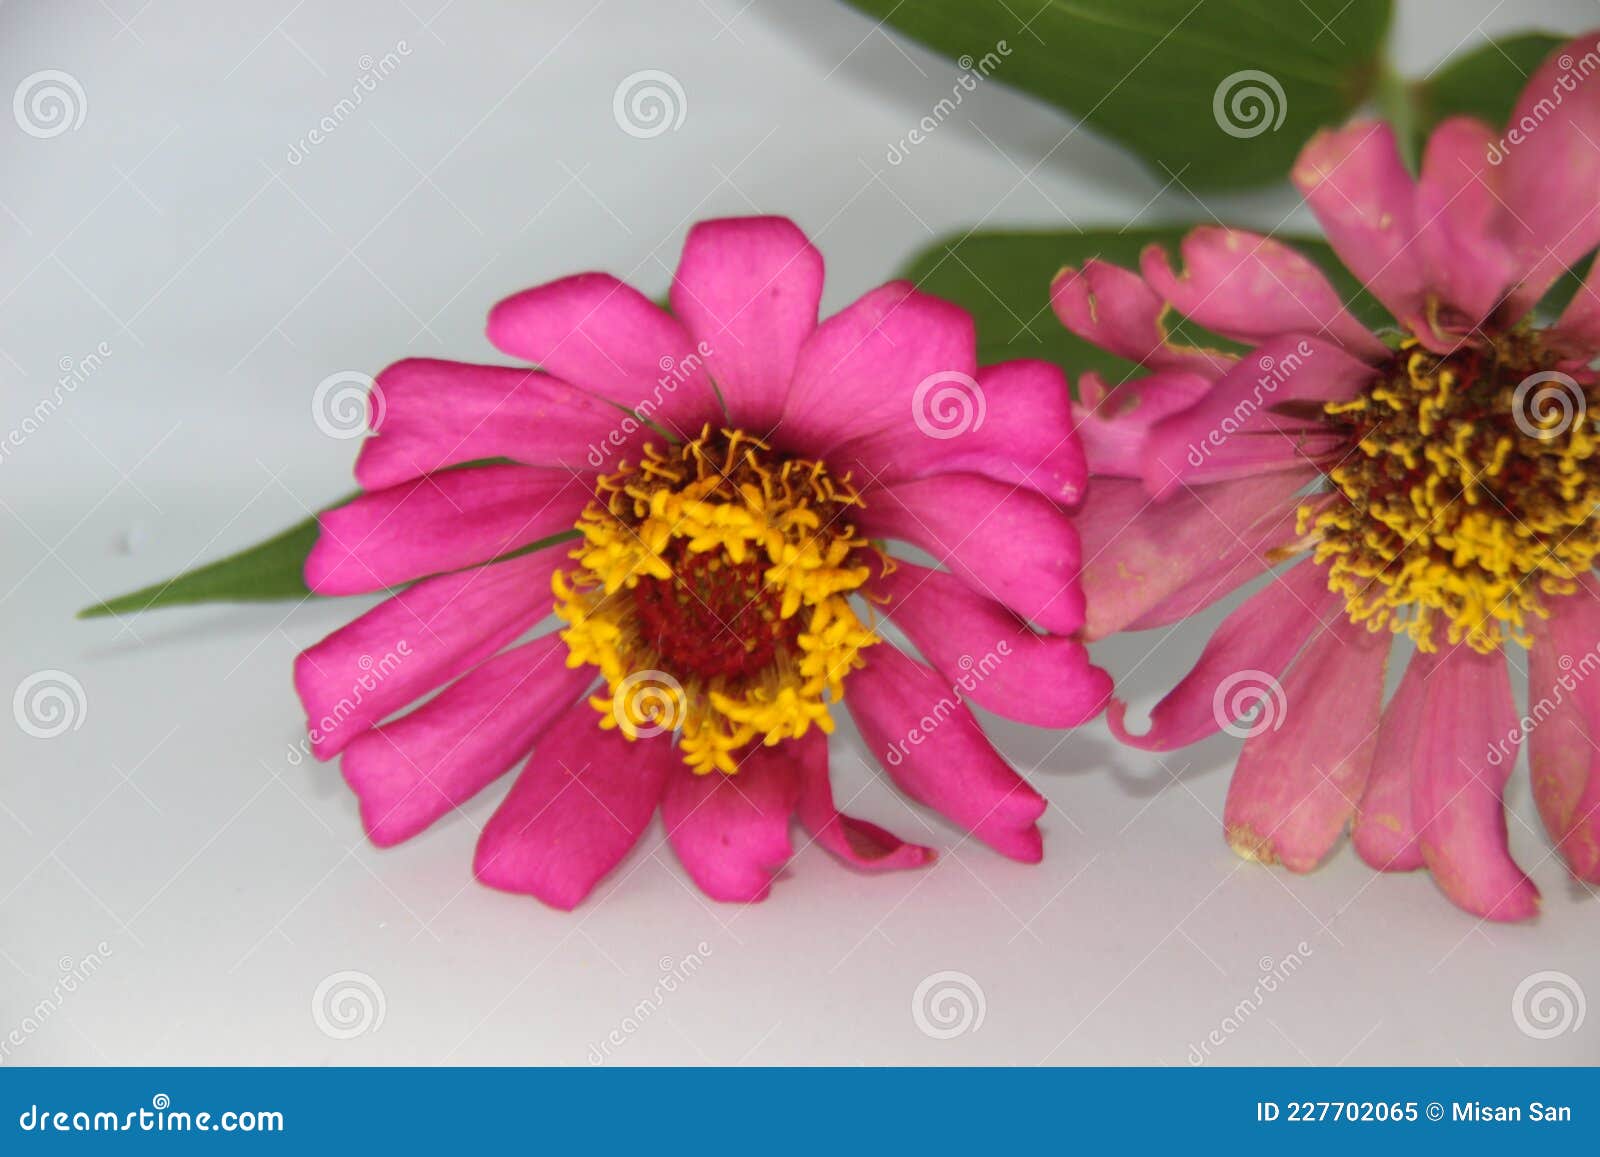 beautiful two zinnia pink flower in white background. top view, collection set of orange and violet zinnia flower blossom blooming